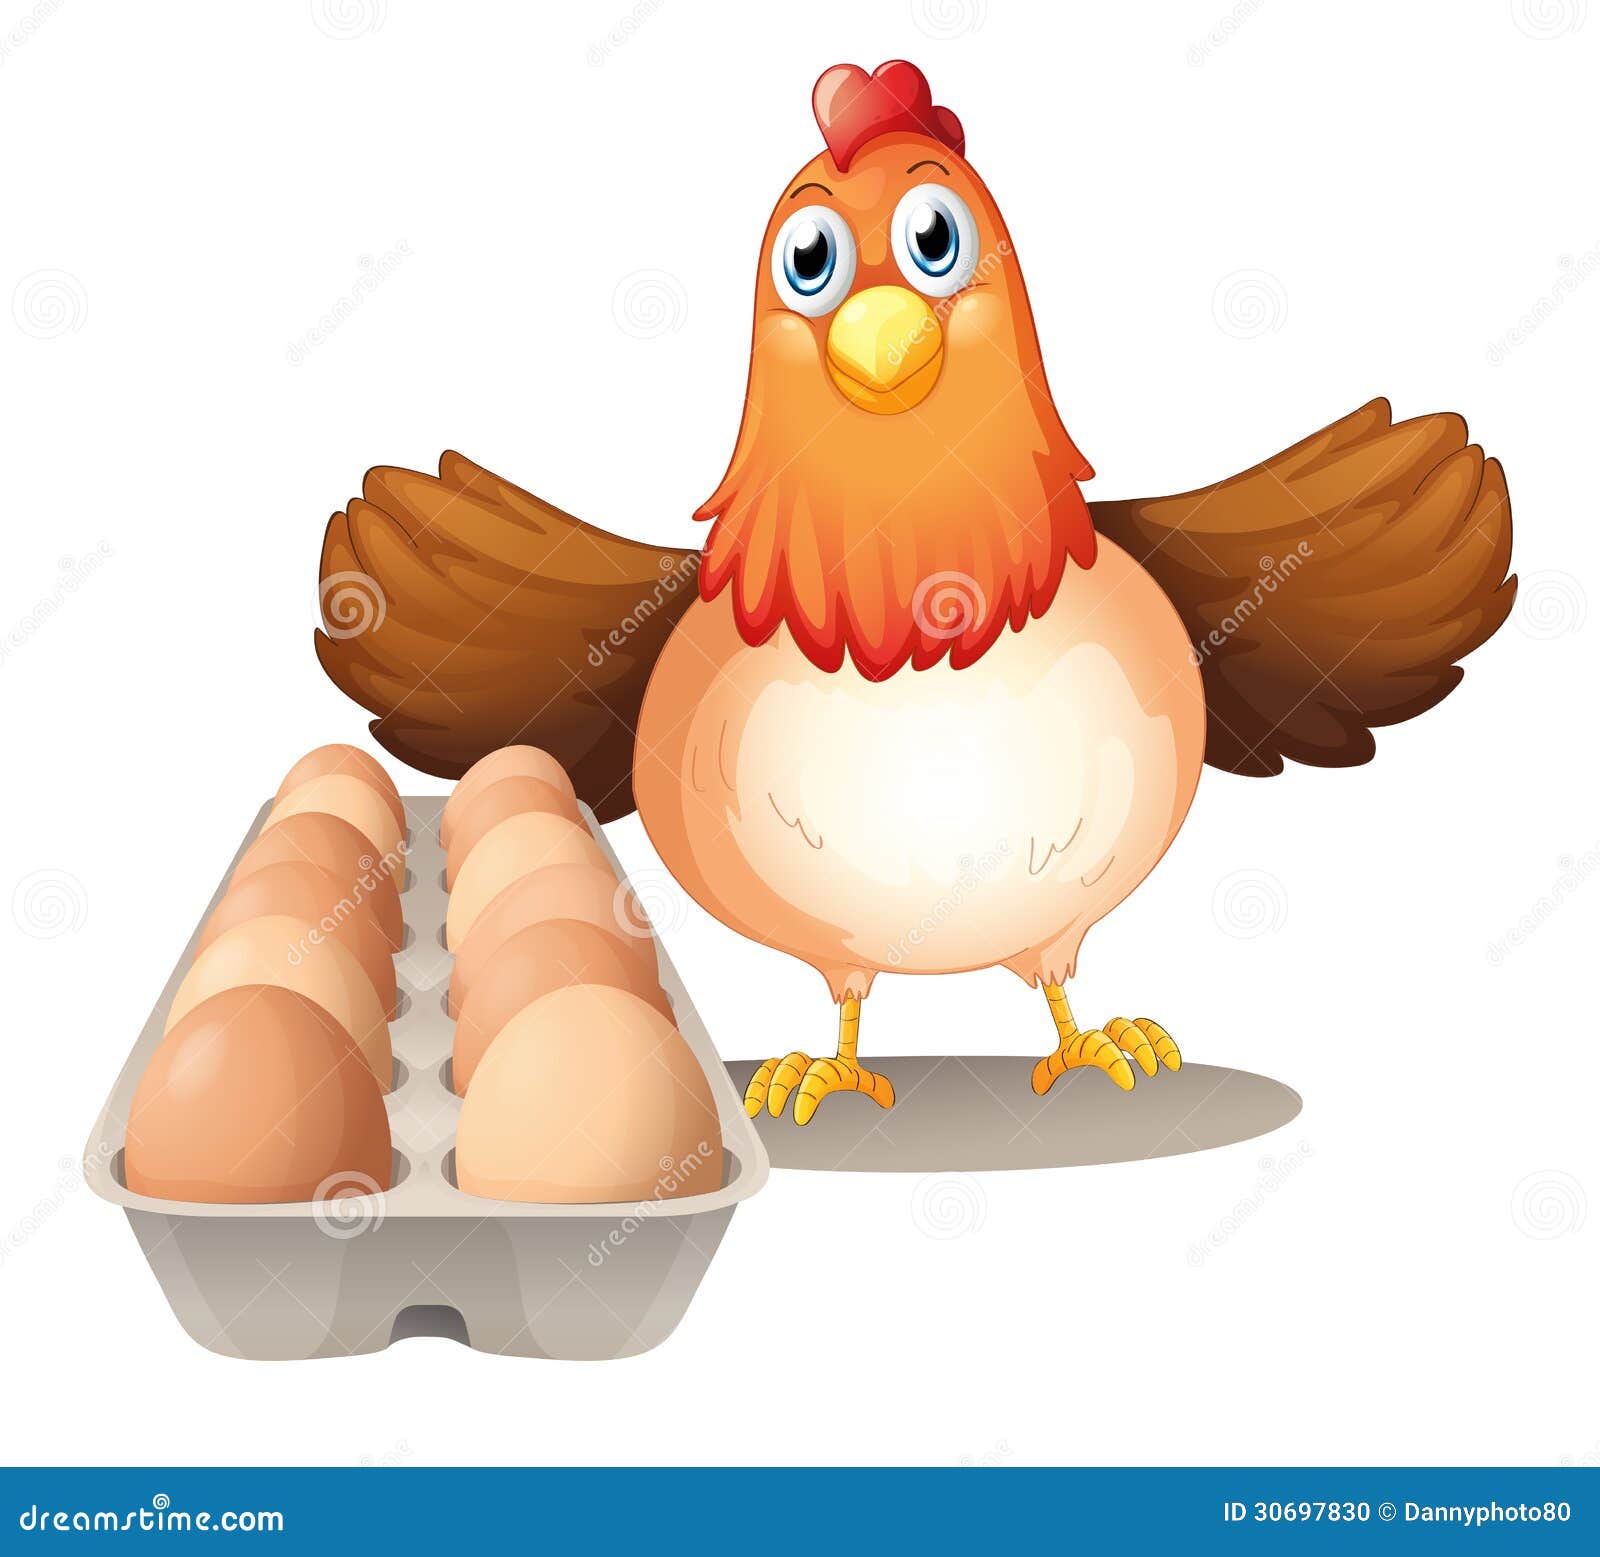 clipart chicken and egg - photo #38